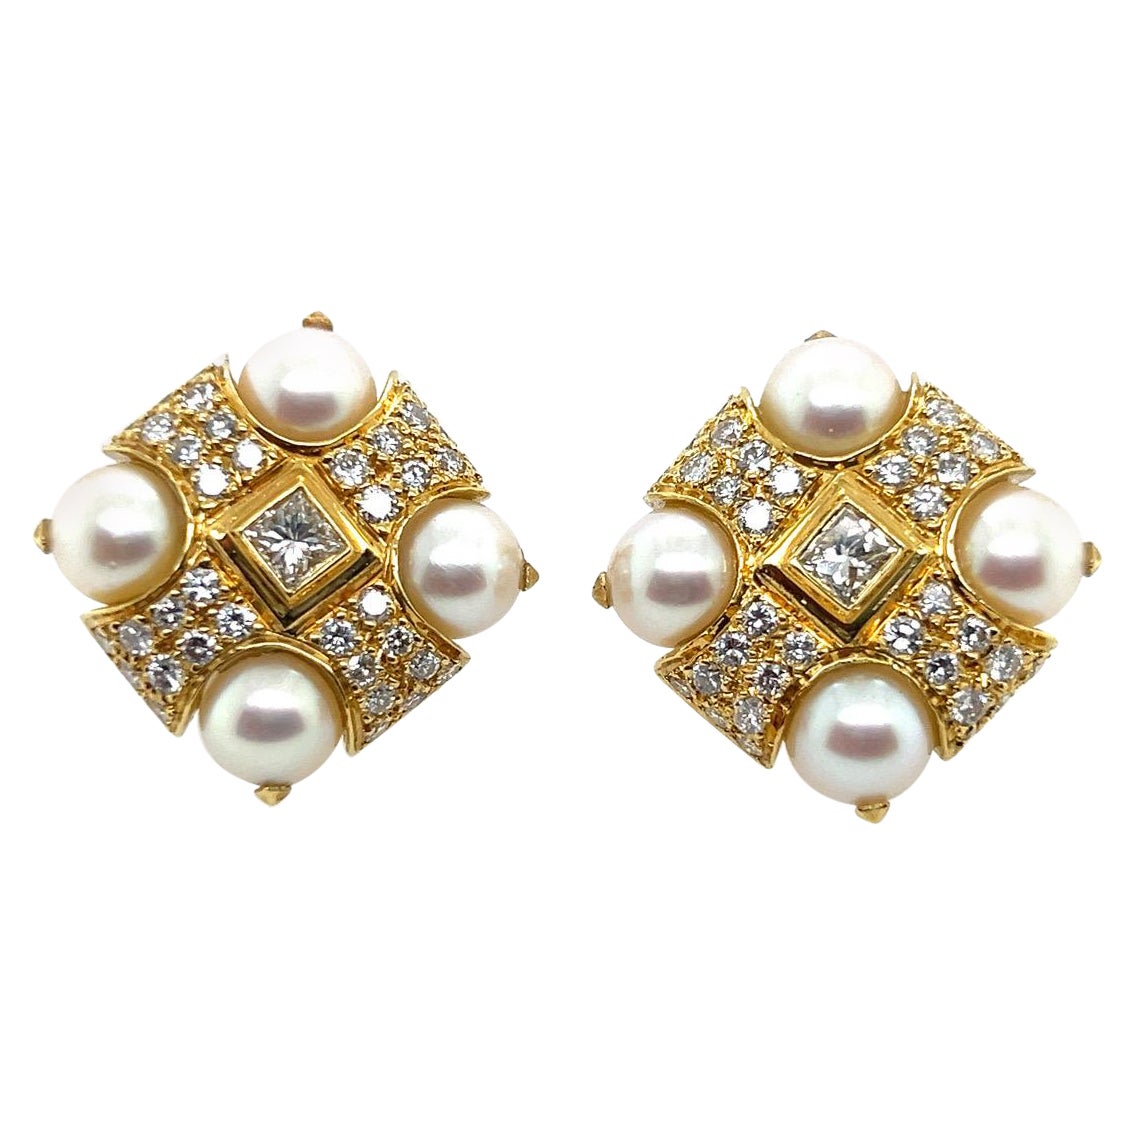 Retro Gold 3 Carat Natural Colorless Diamond and Akoya Pearl Earrings Circa 1980 For Sale